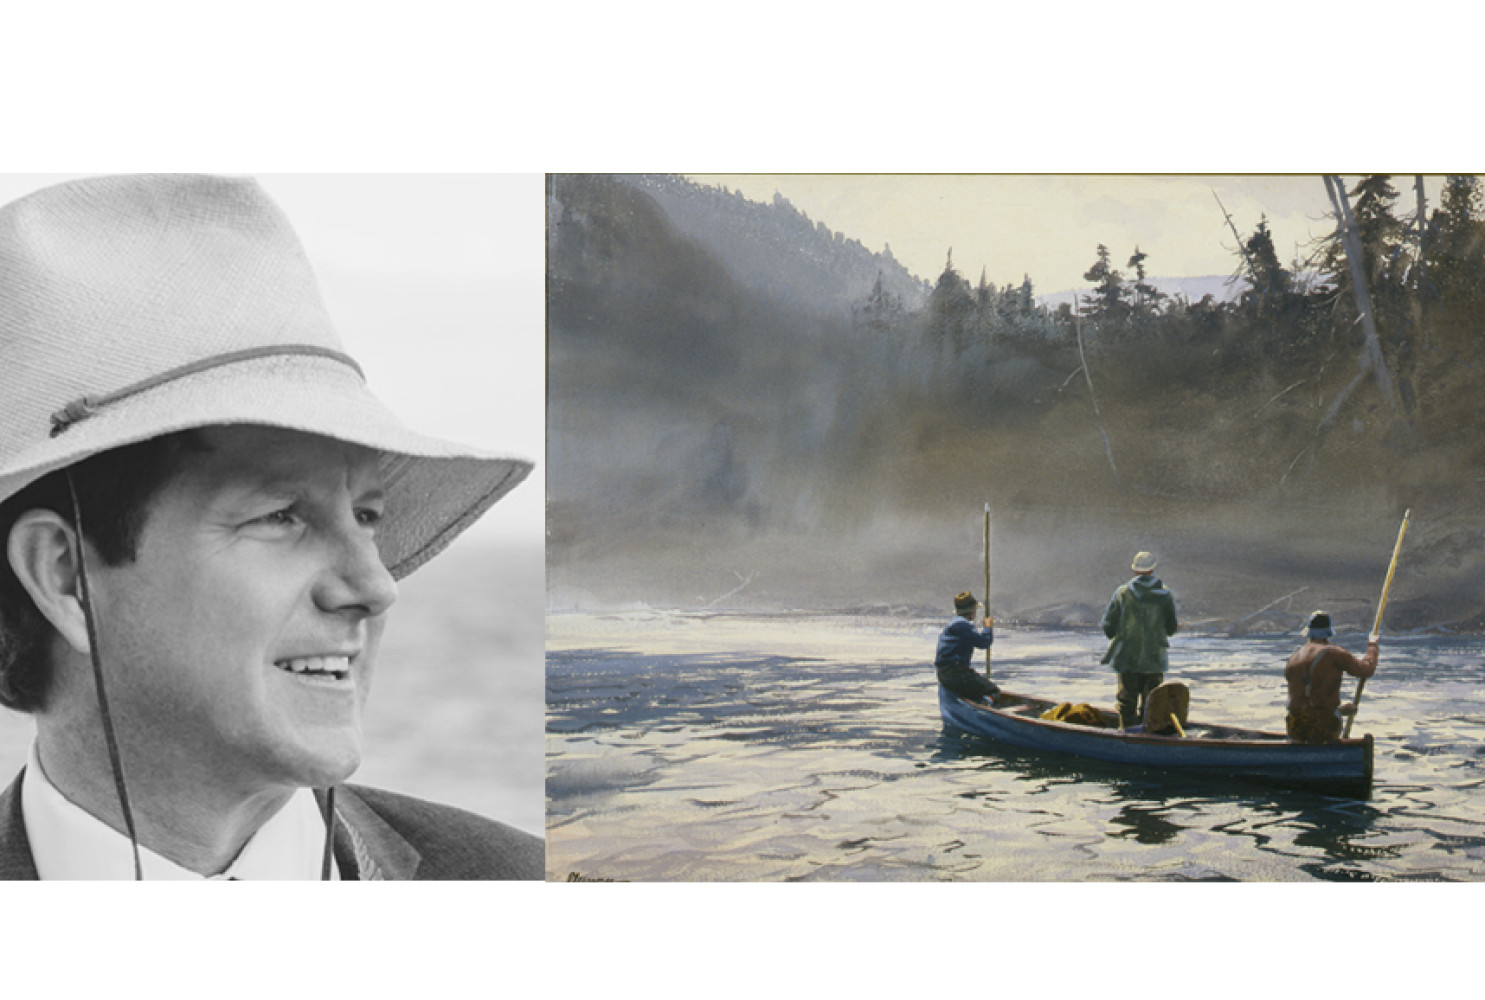 Left: Chris Crolley (provided); Right: Ogden M. Pleissner, Blue Boat on the St. Anne, 1958.  Watercolor on paper, 17 1/4 x 27 1/2 in.  Collection of Shelburne Museum, gift of Marion W.G.  Pleissner. 1986-98.1. Photography by Andy Duback.